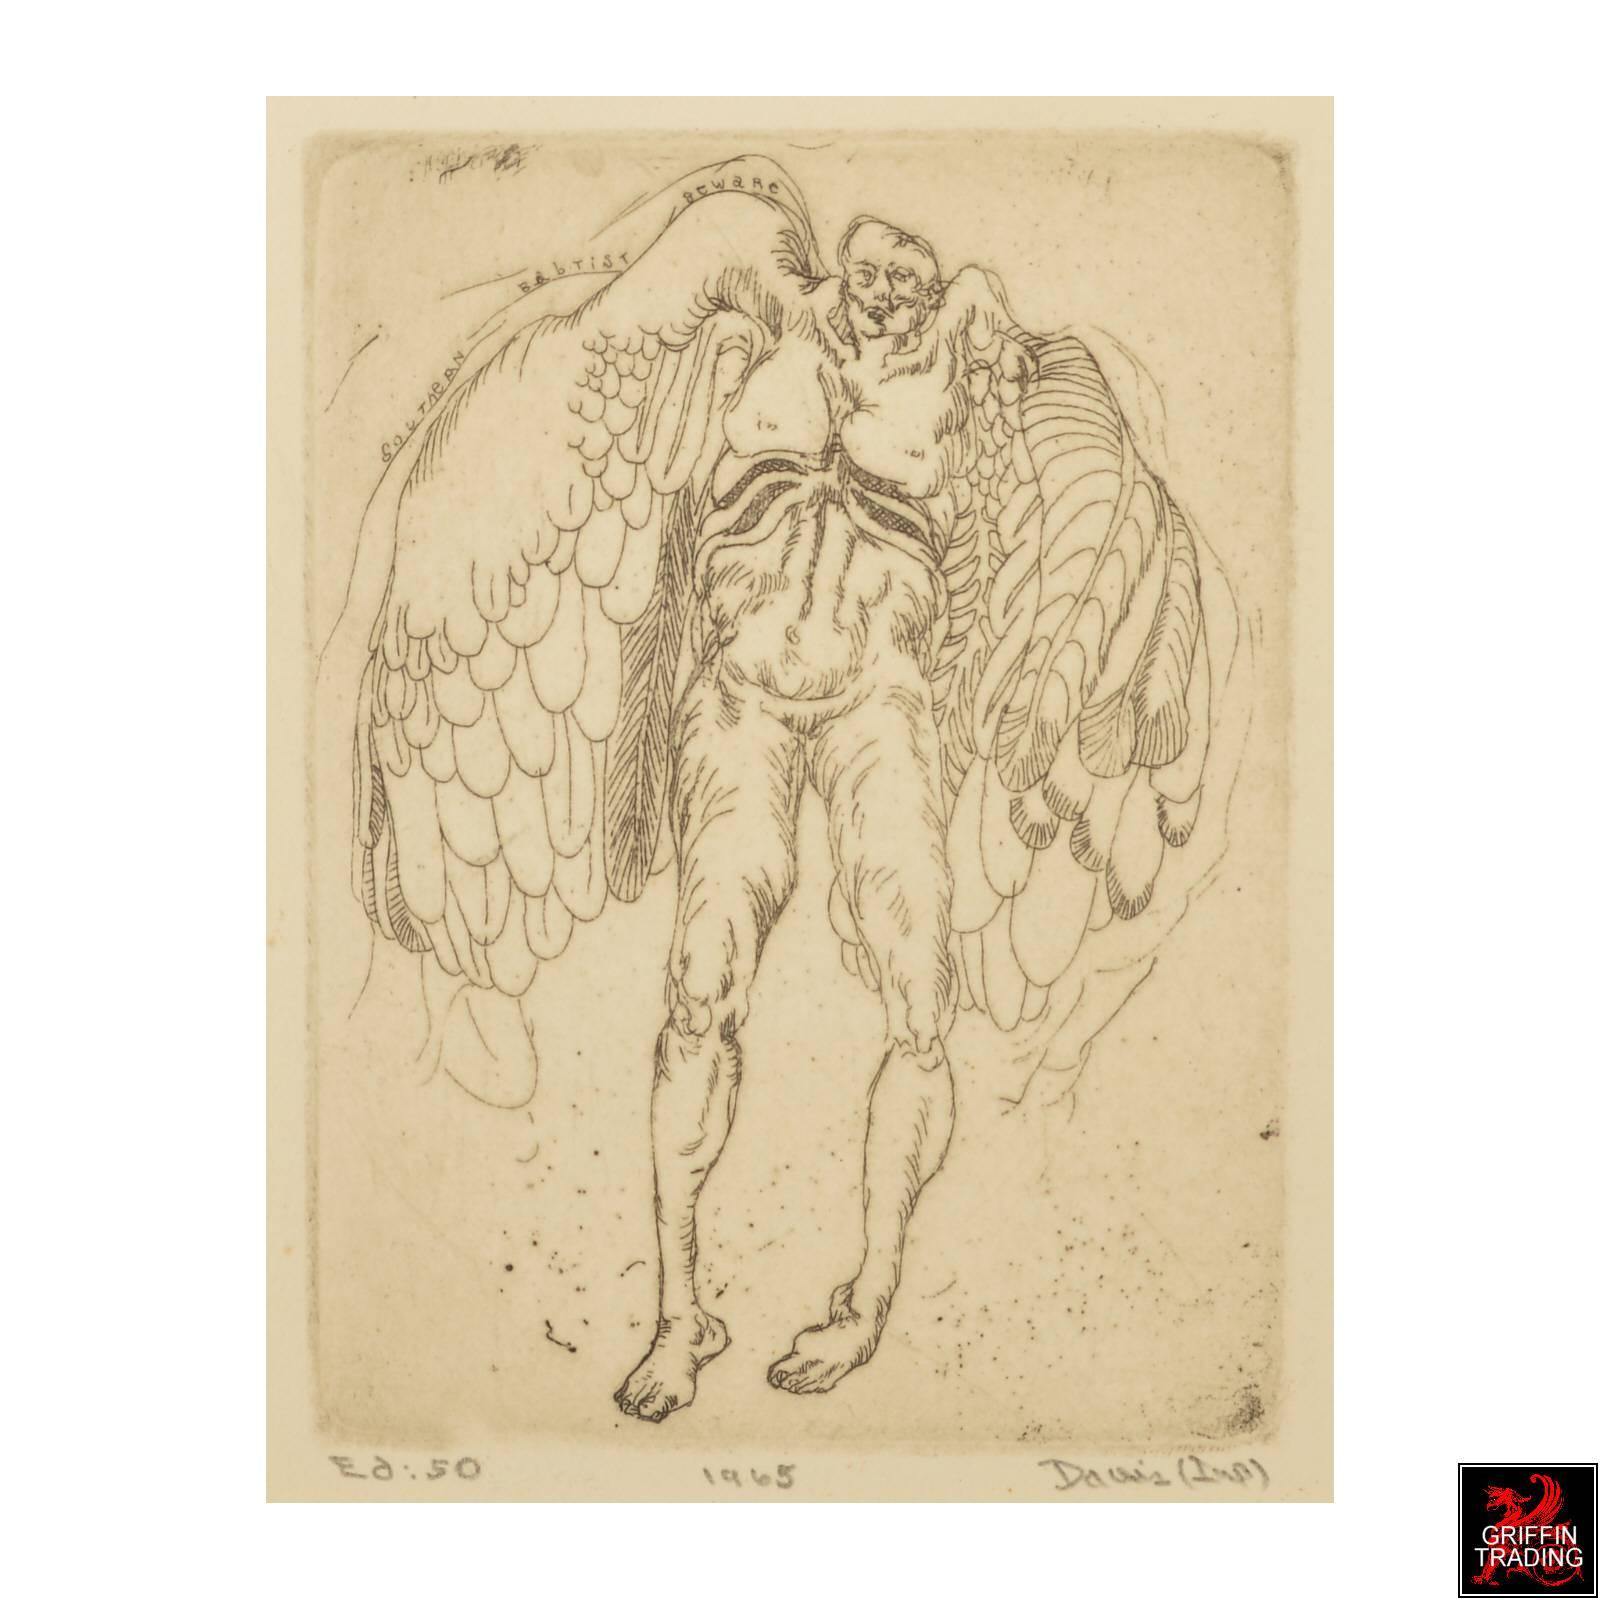 icarus etching